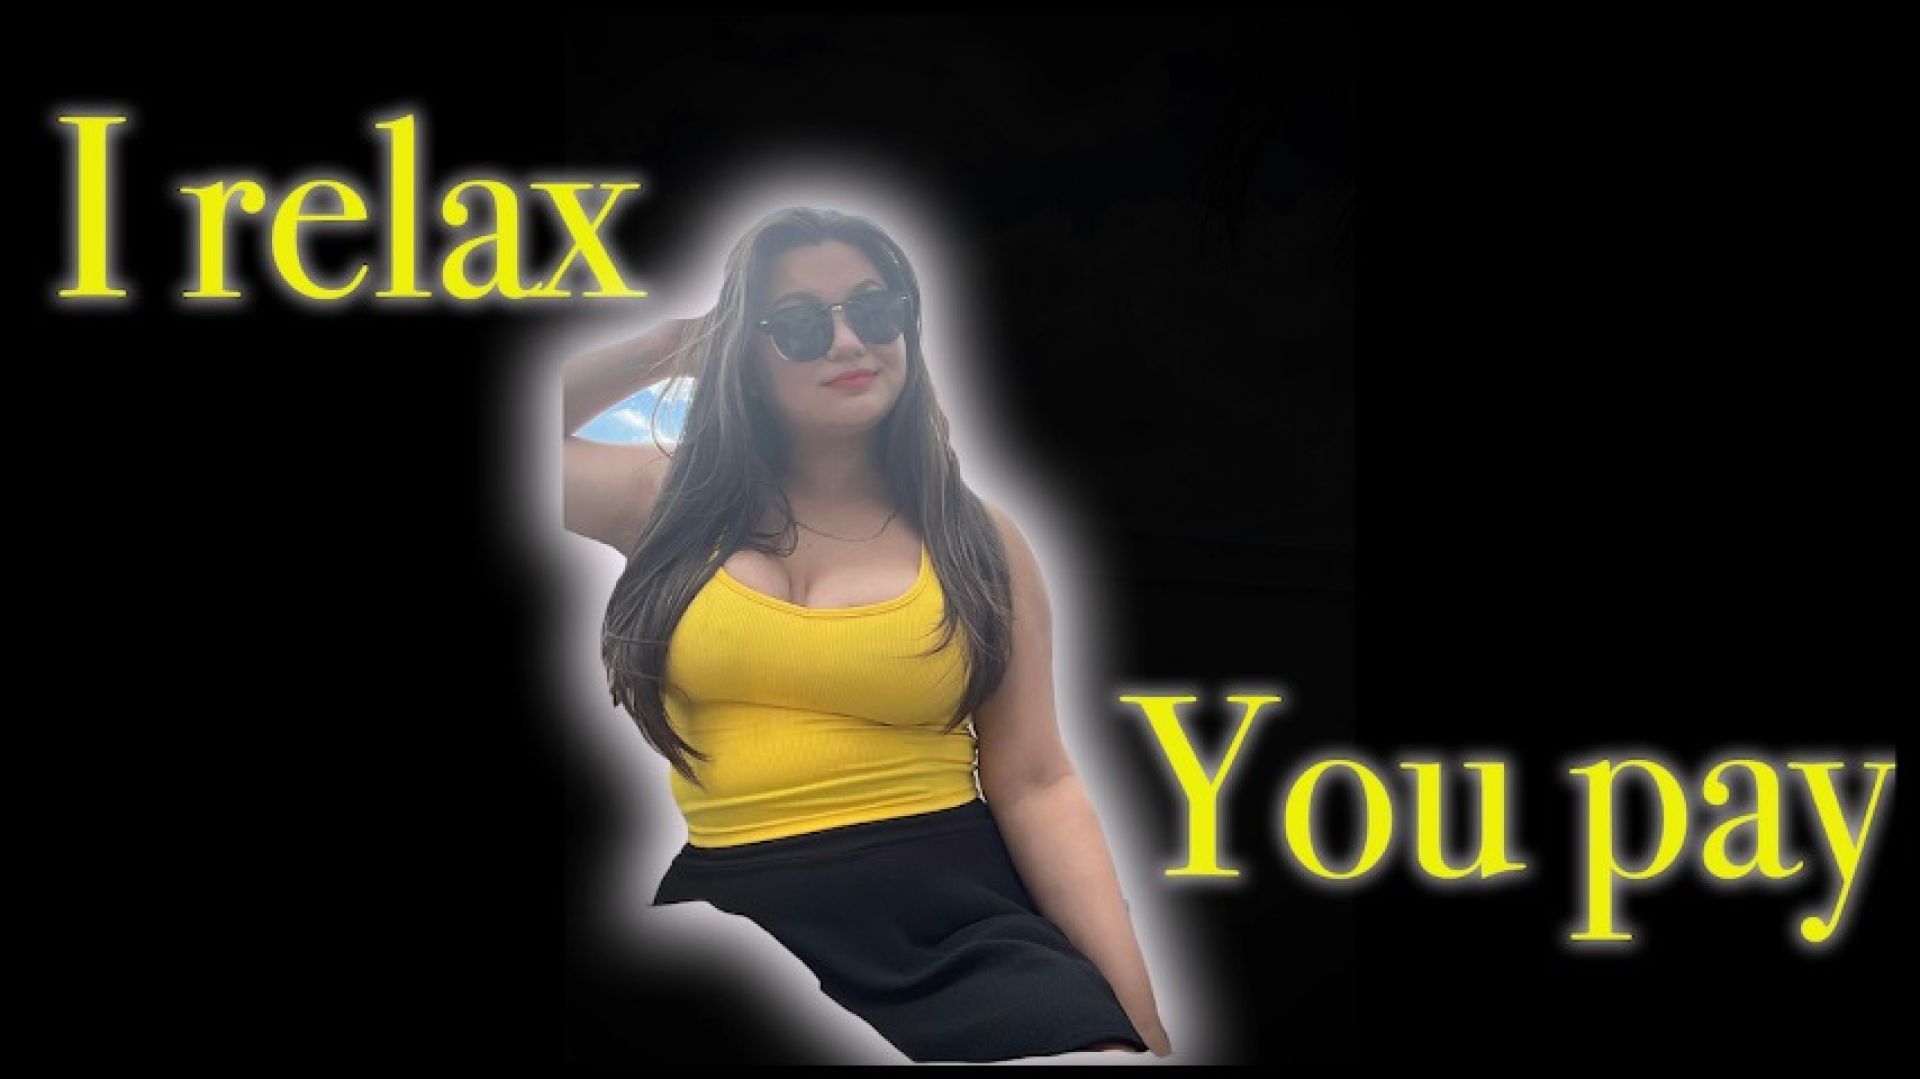 I relax, you pay